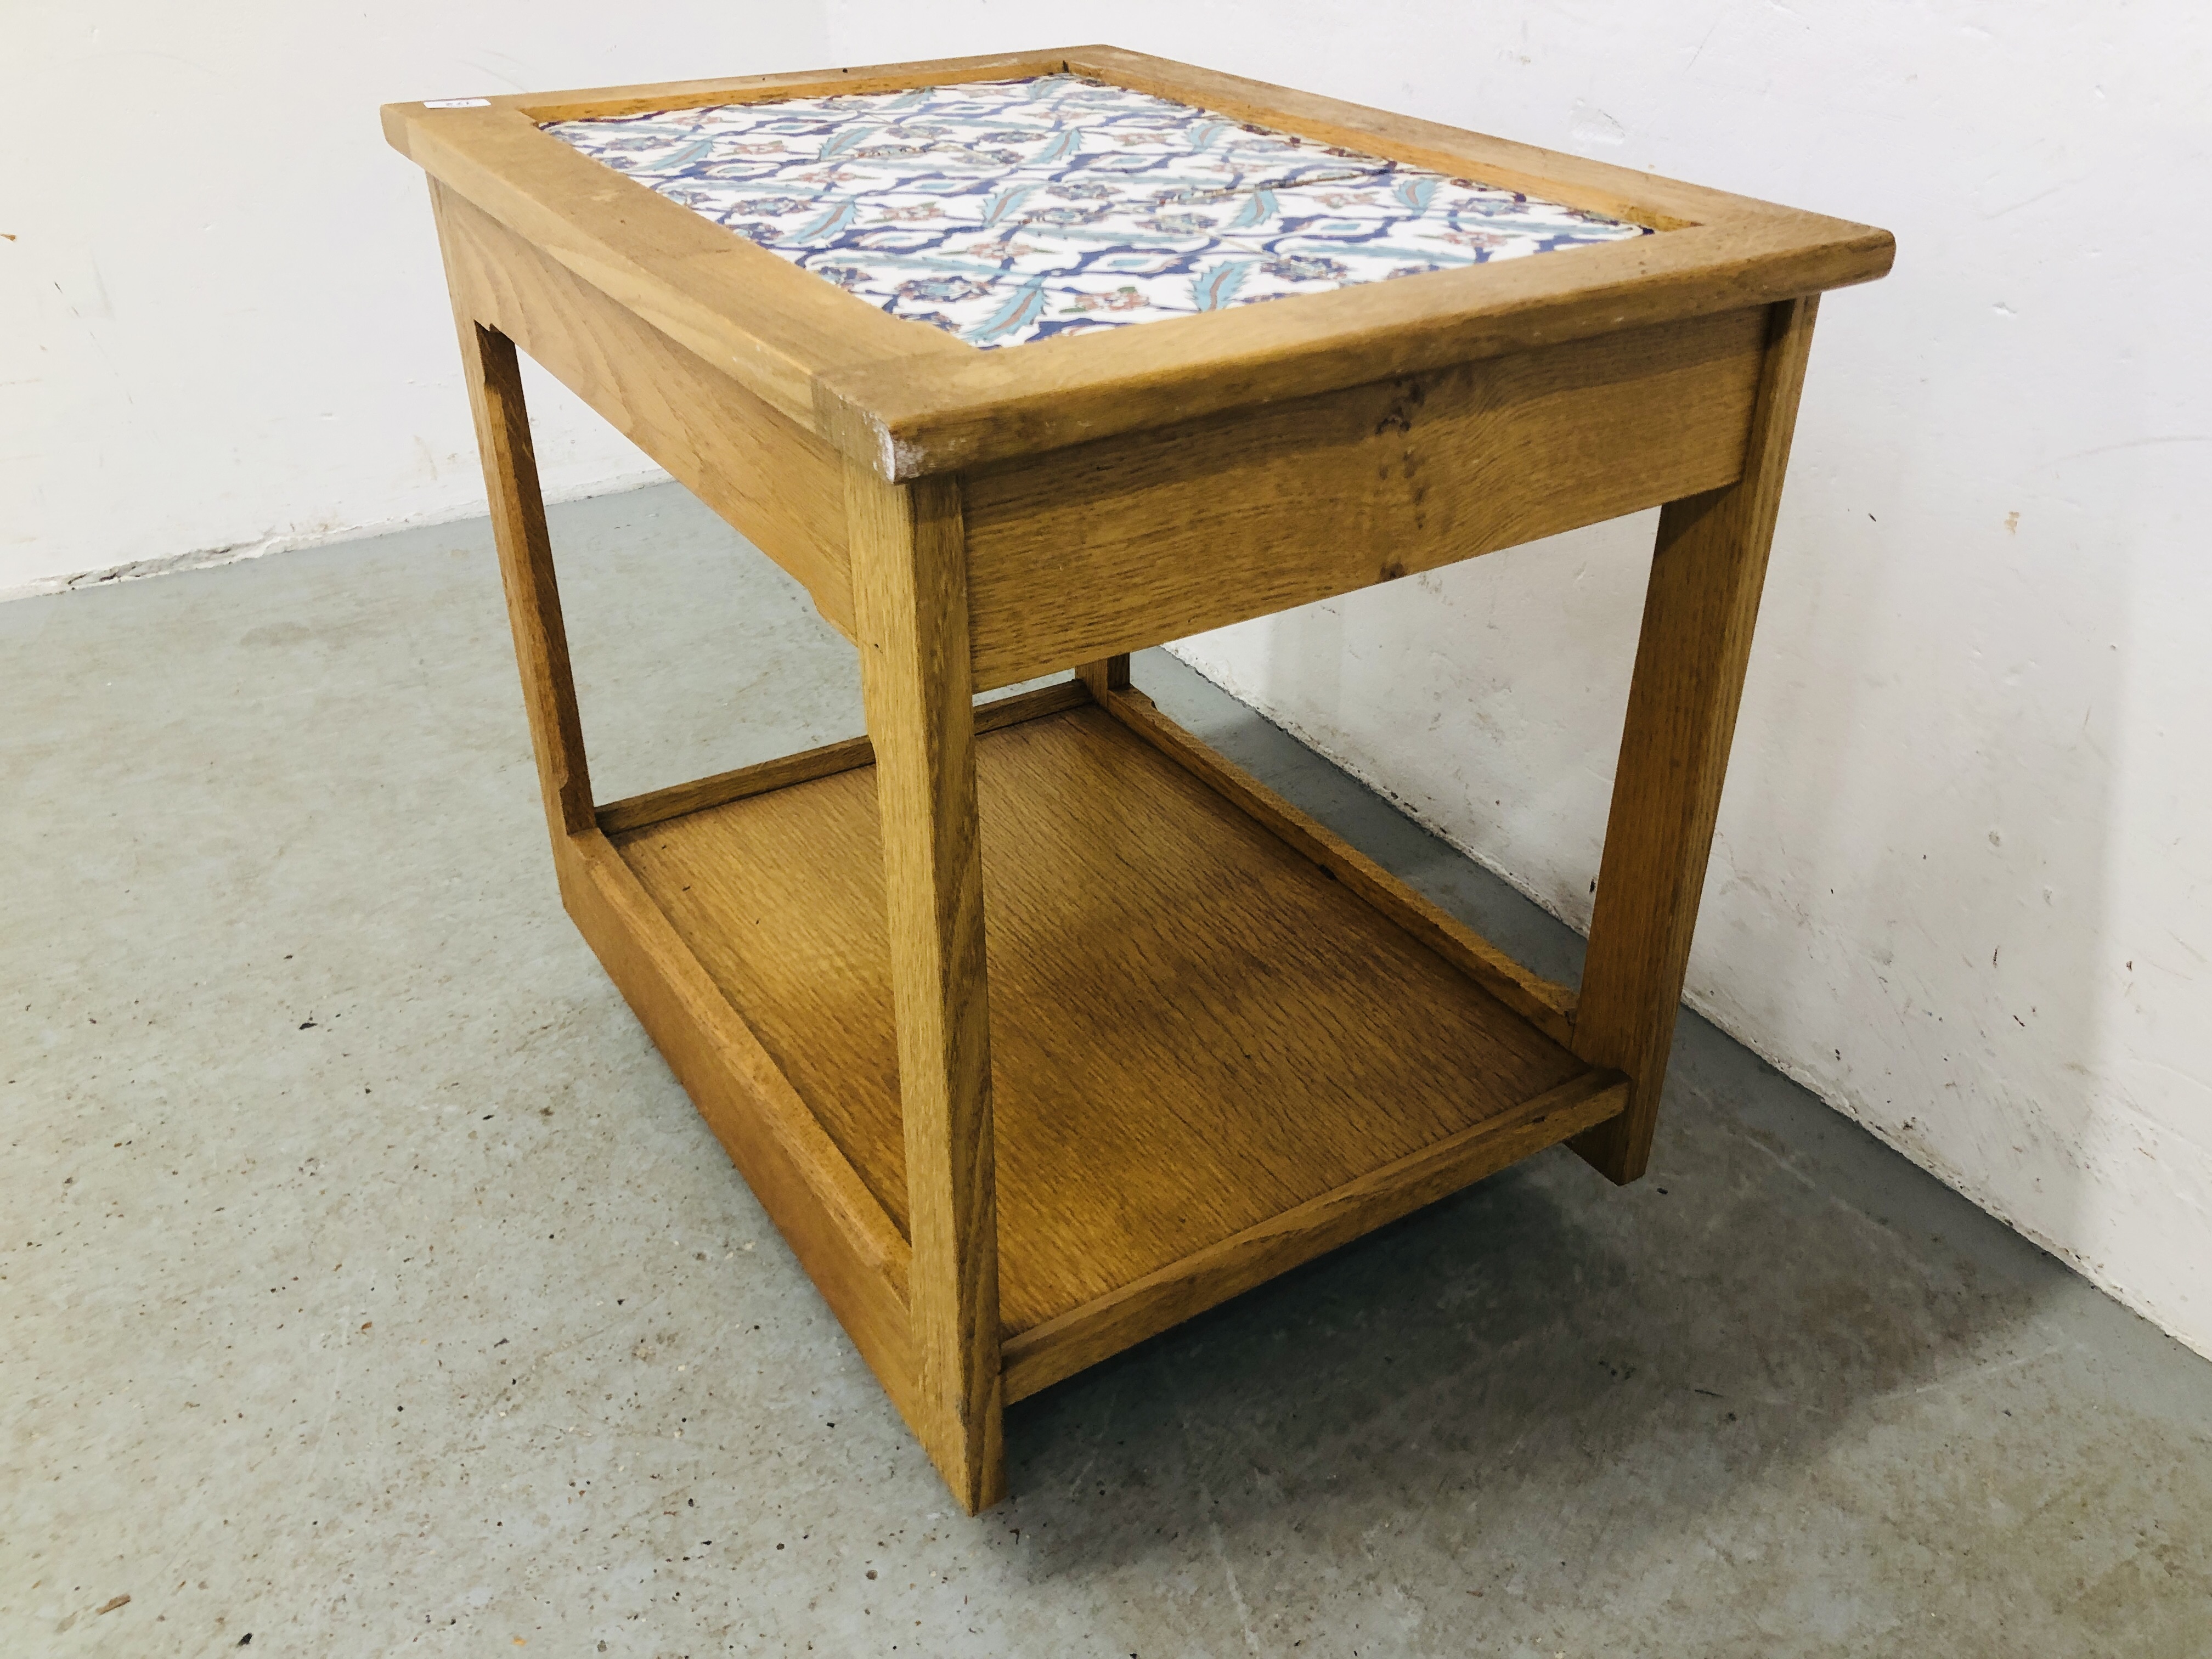 AN OAK TWO TIER TROLLEY THE TOP INSET WITH CERAMIC TILES, DRAWER TO END LENGTH 74CM. WIDTH 54CM. - Image 3 of 6